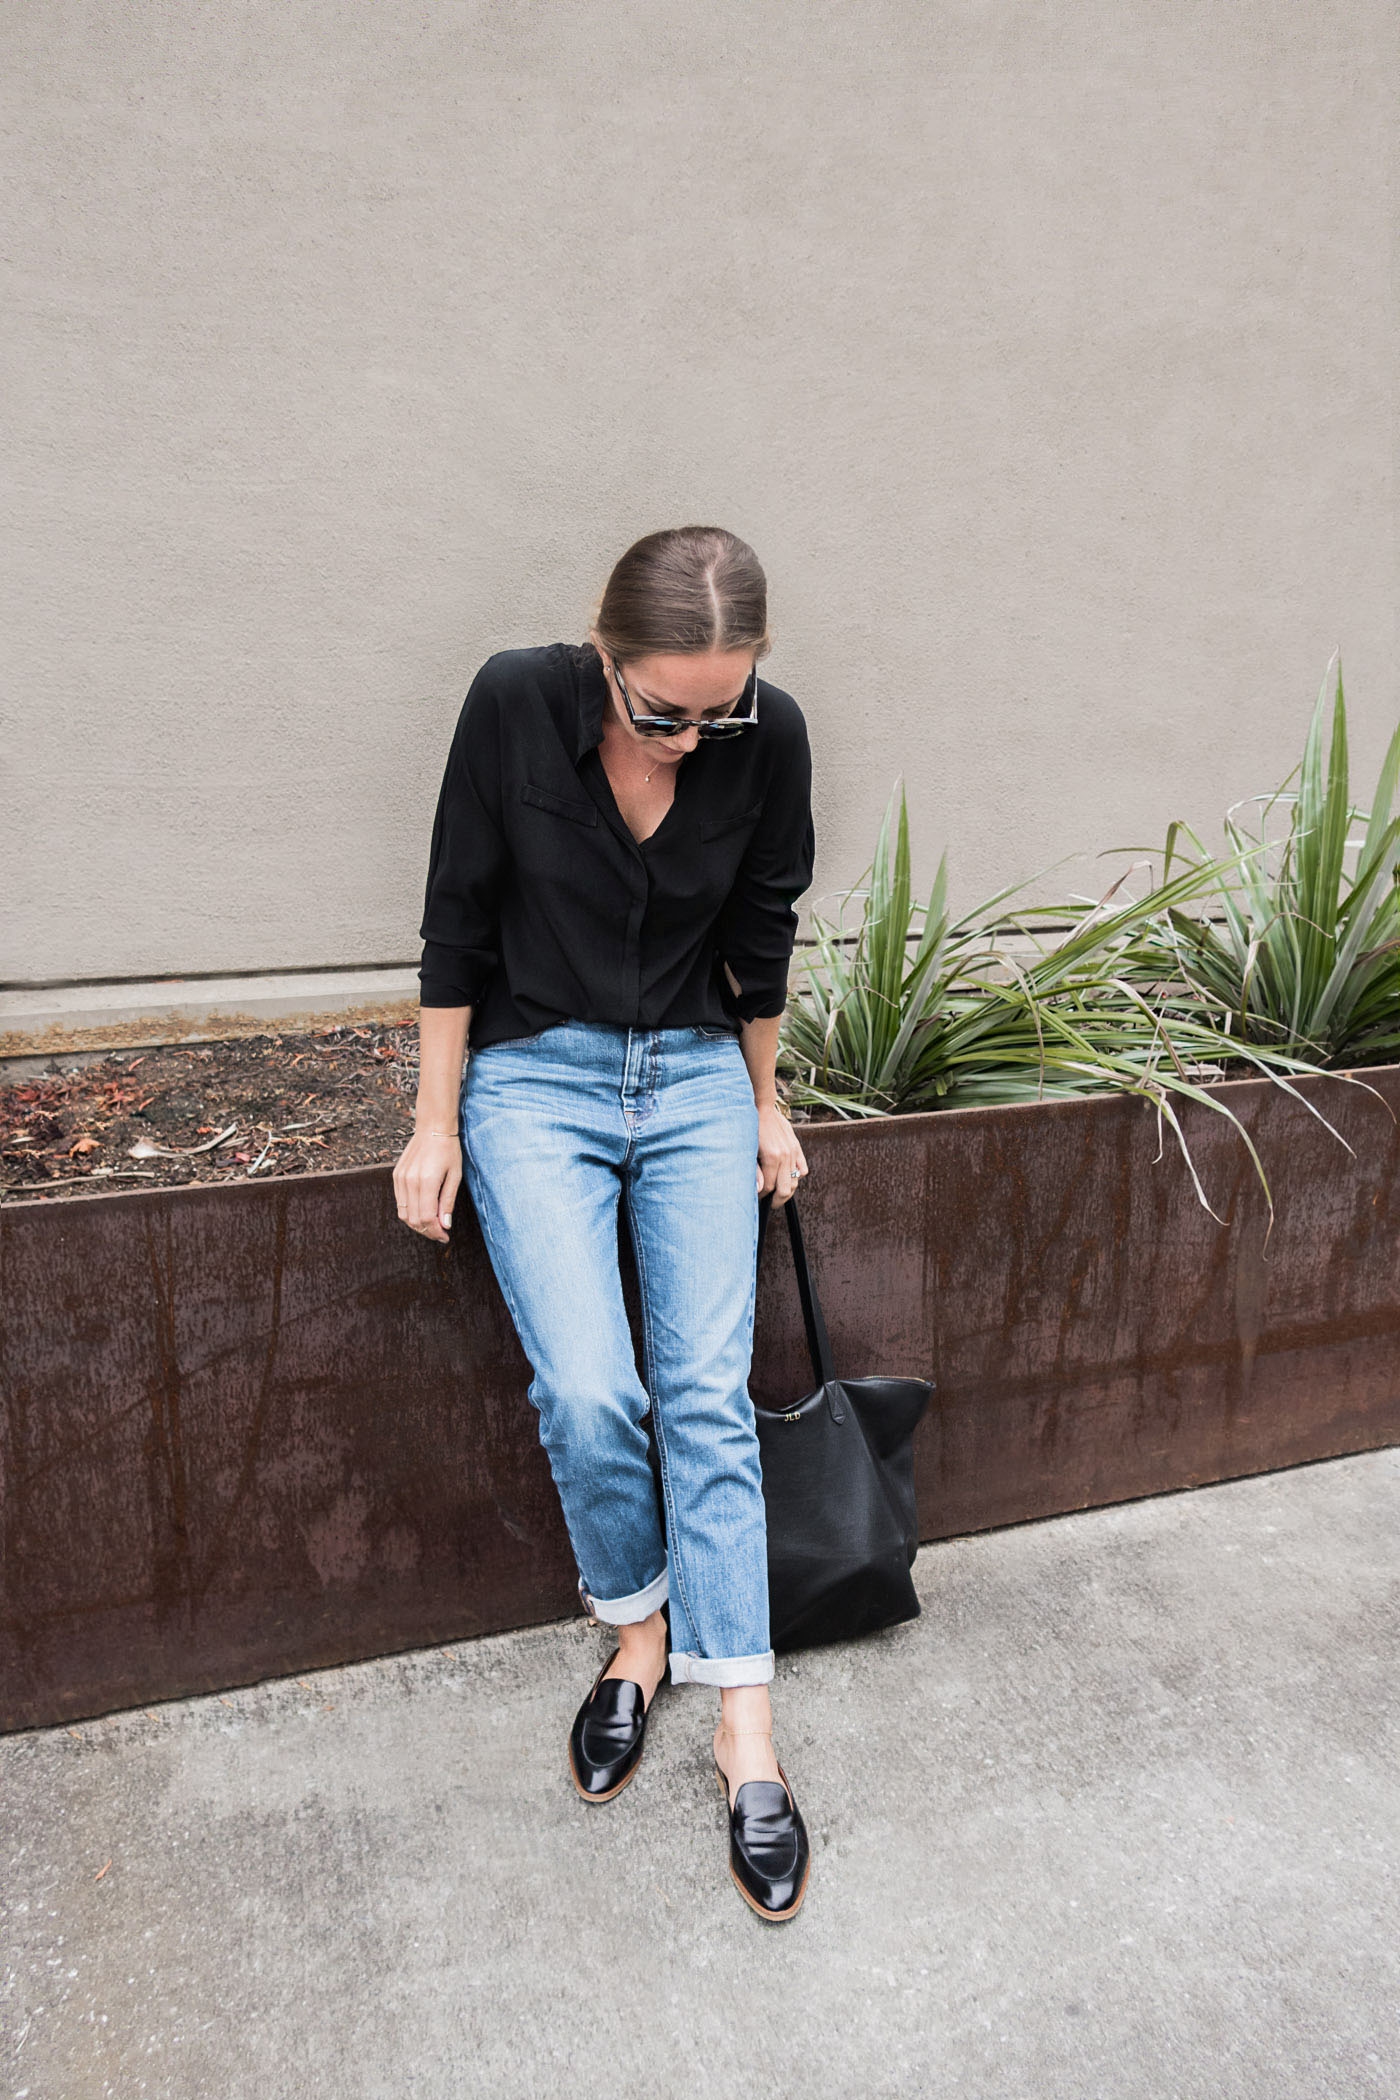 Everlane's feel good denim. Eco-friendly, affordable, great fit.